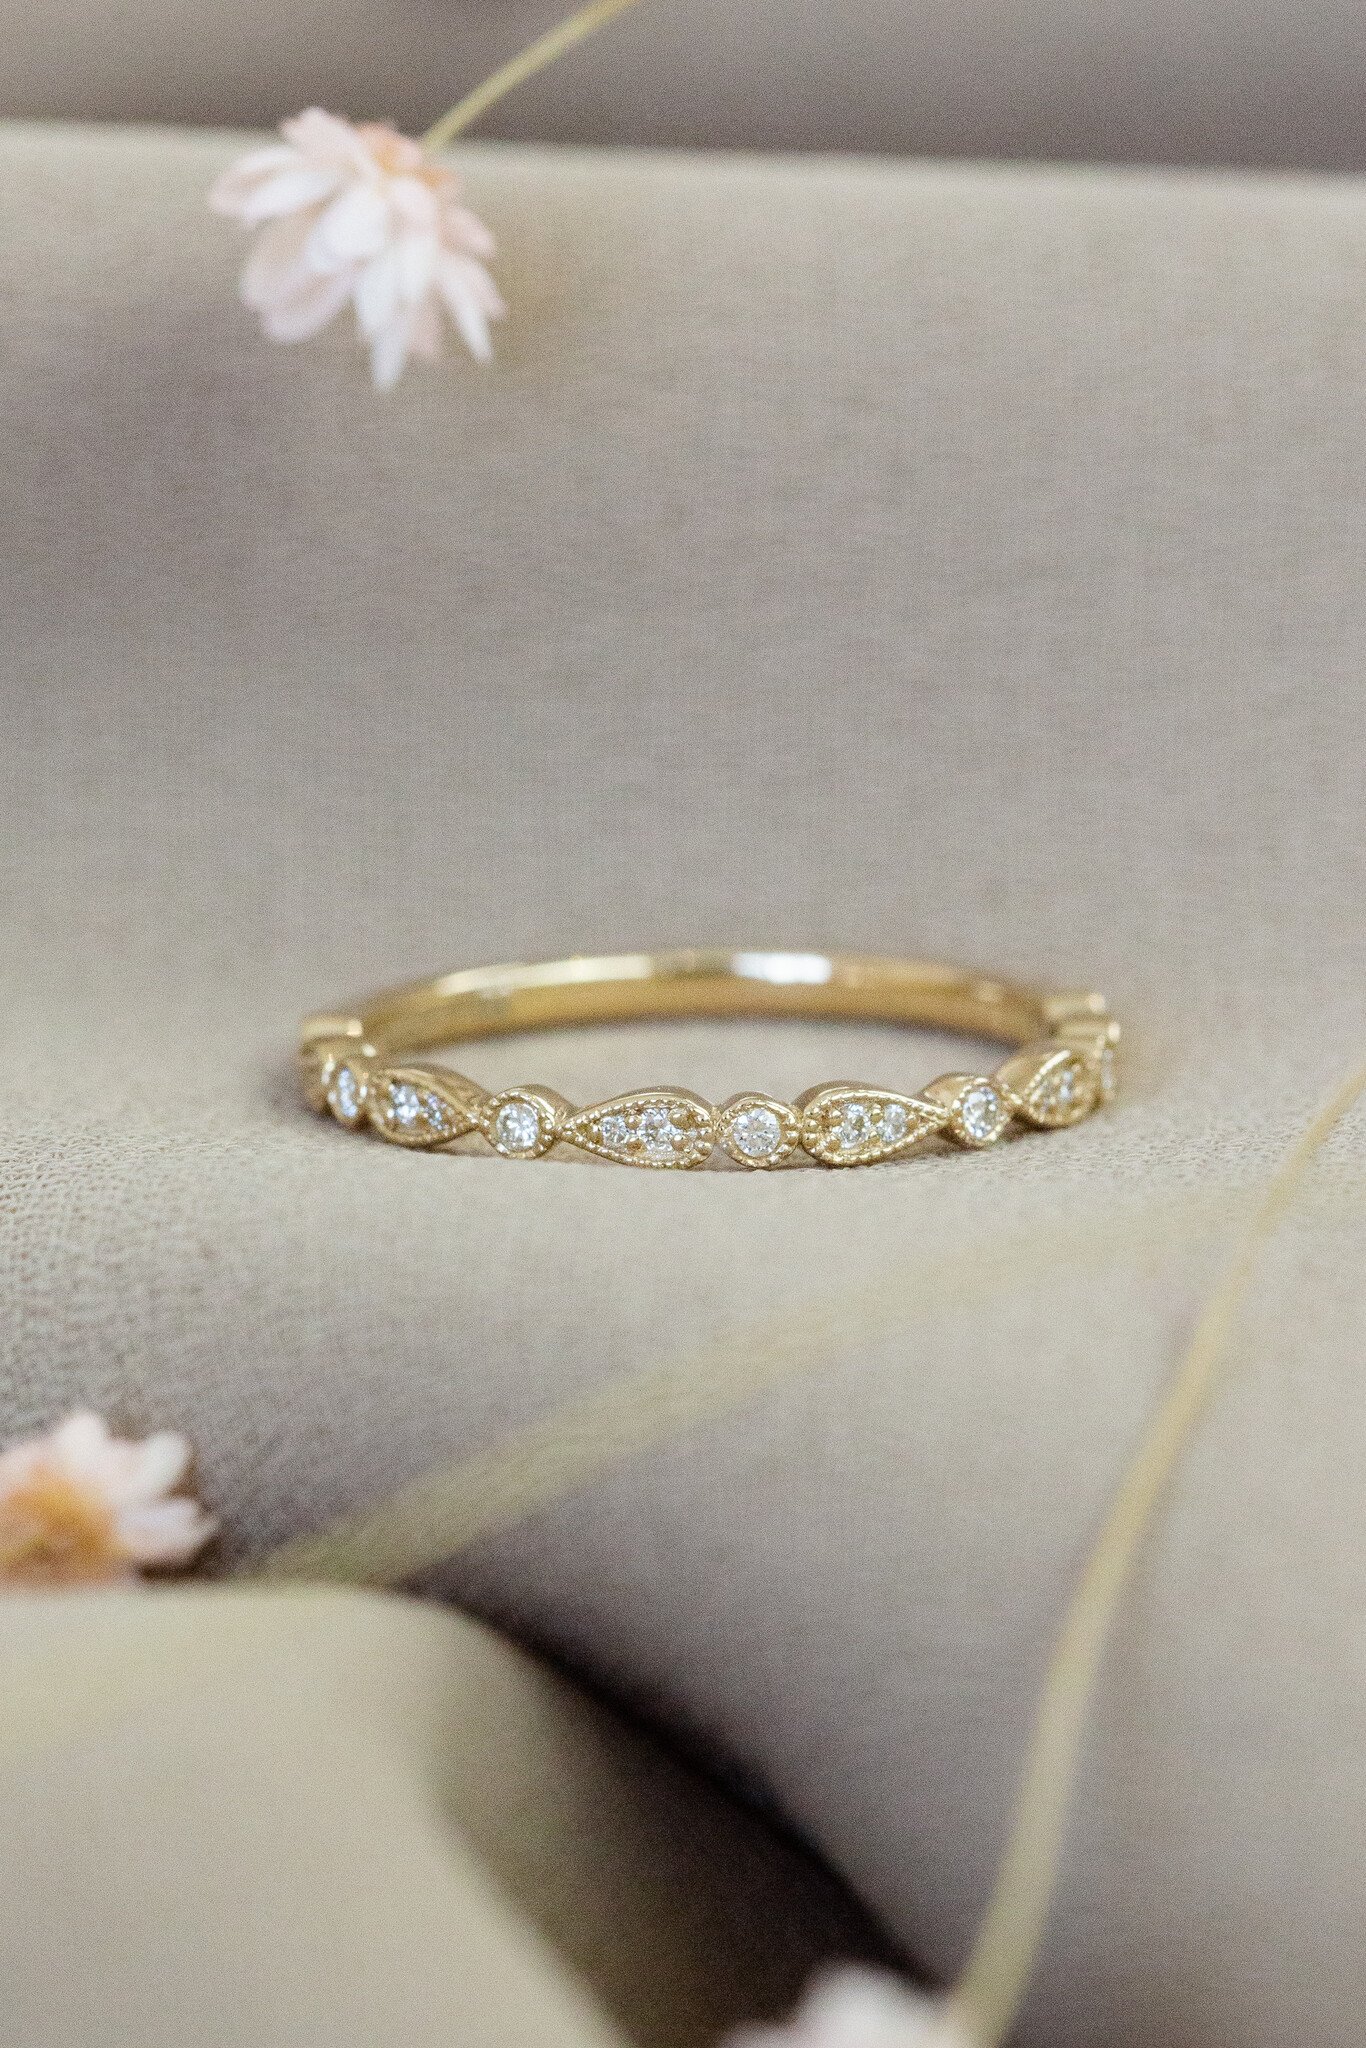 Wedding Ring with Diamonds in Eternity Style | KLENOTA